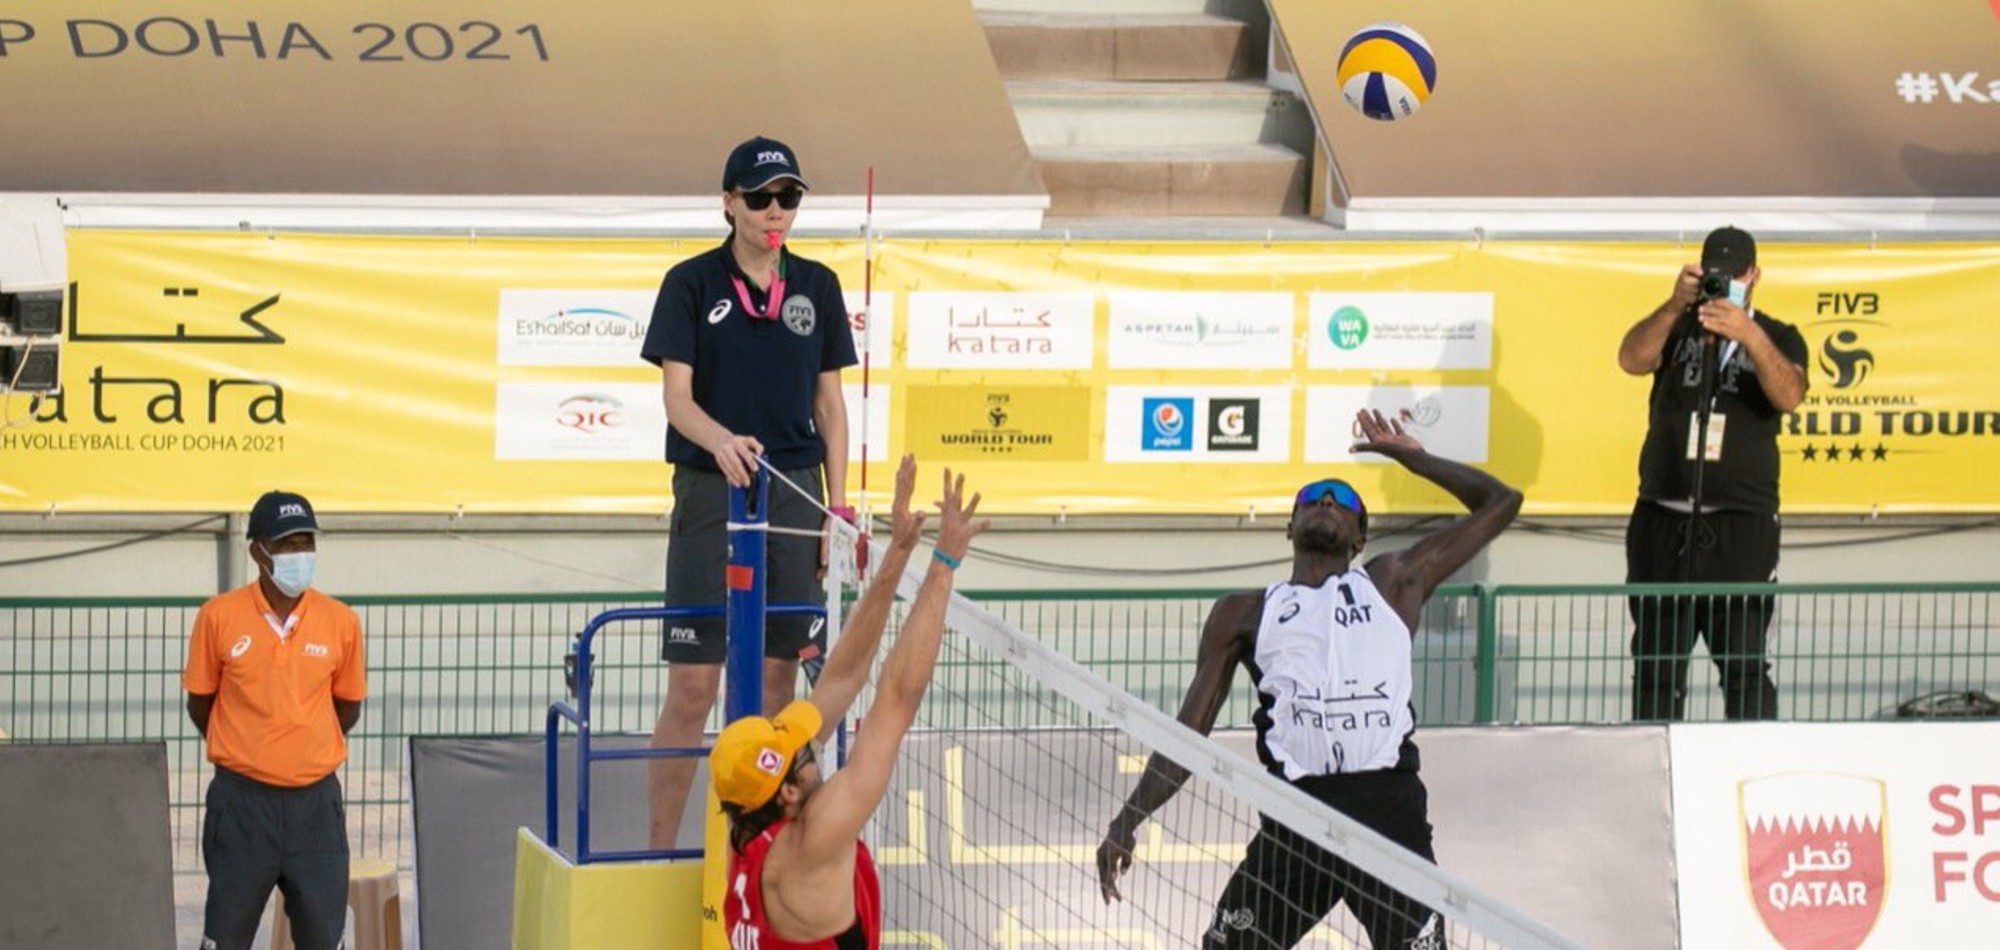 Younousse and Tijan qualify to second round of Katara Beach Volleyball Cup